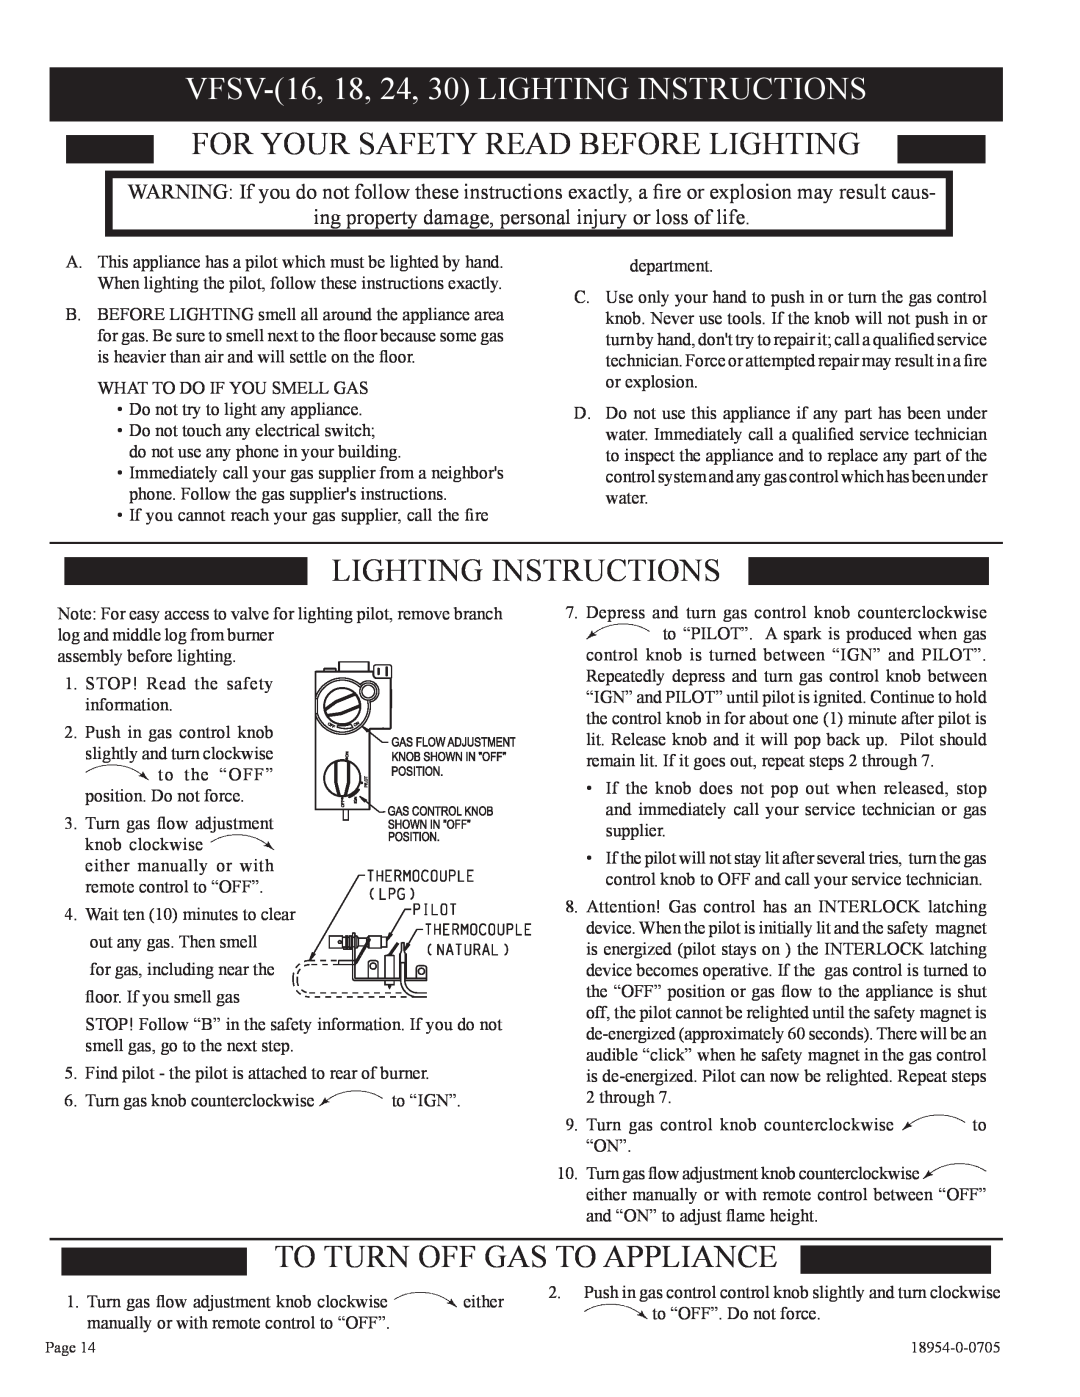 Empire Comfort Systems VFSM -30-3 VFSV-16,18, 24, 30 LIGHTING INSTRUCTIONS, For Your Safety Read Before Lighting 